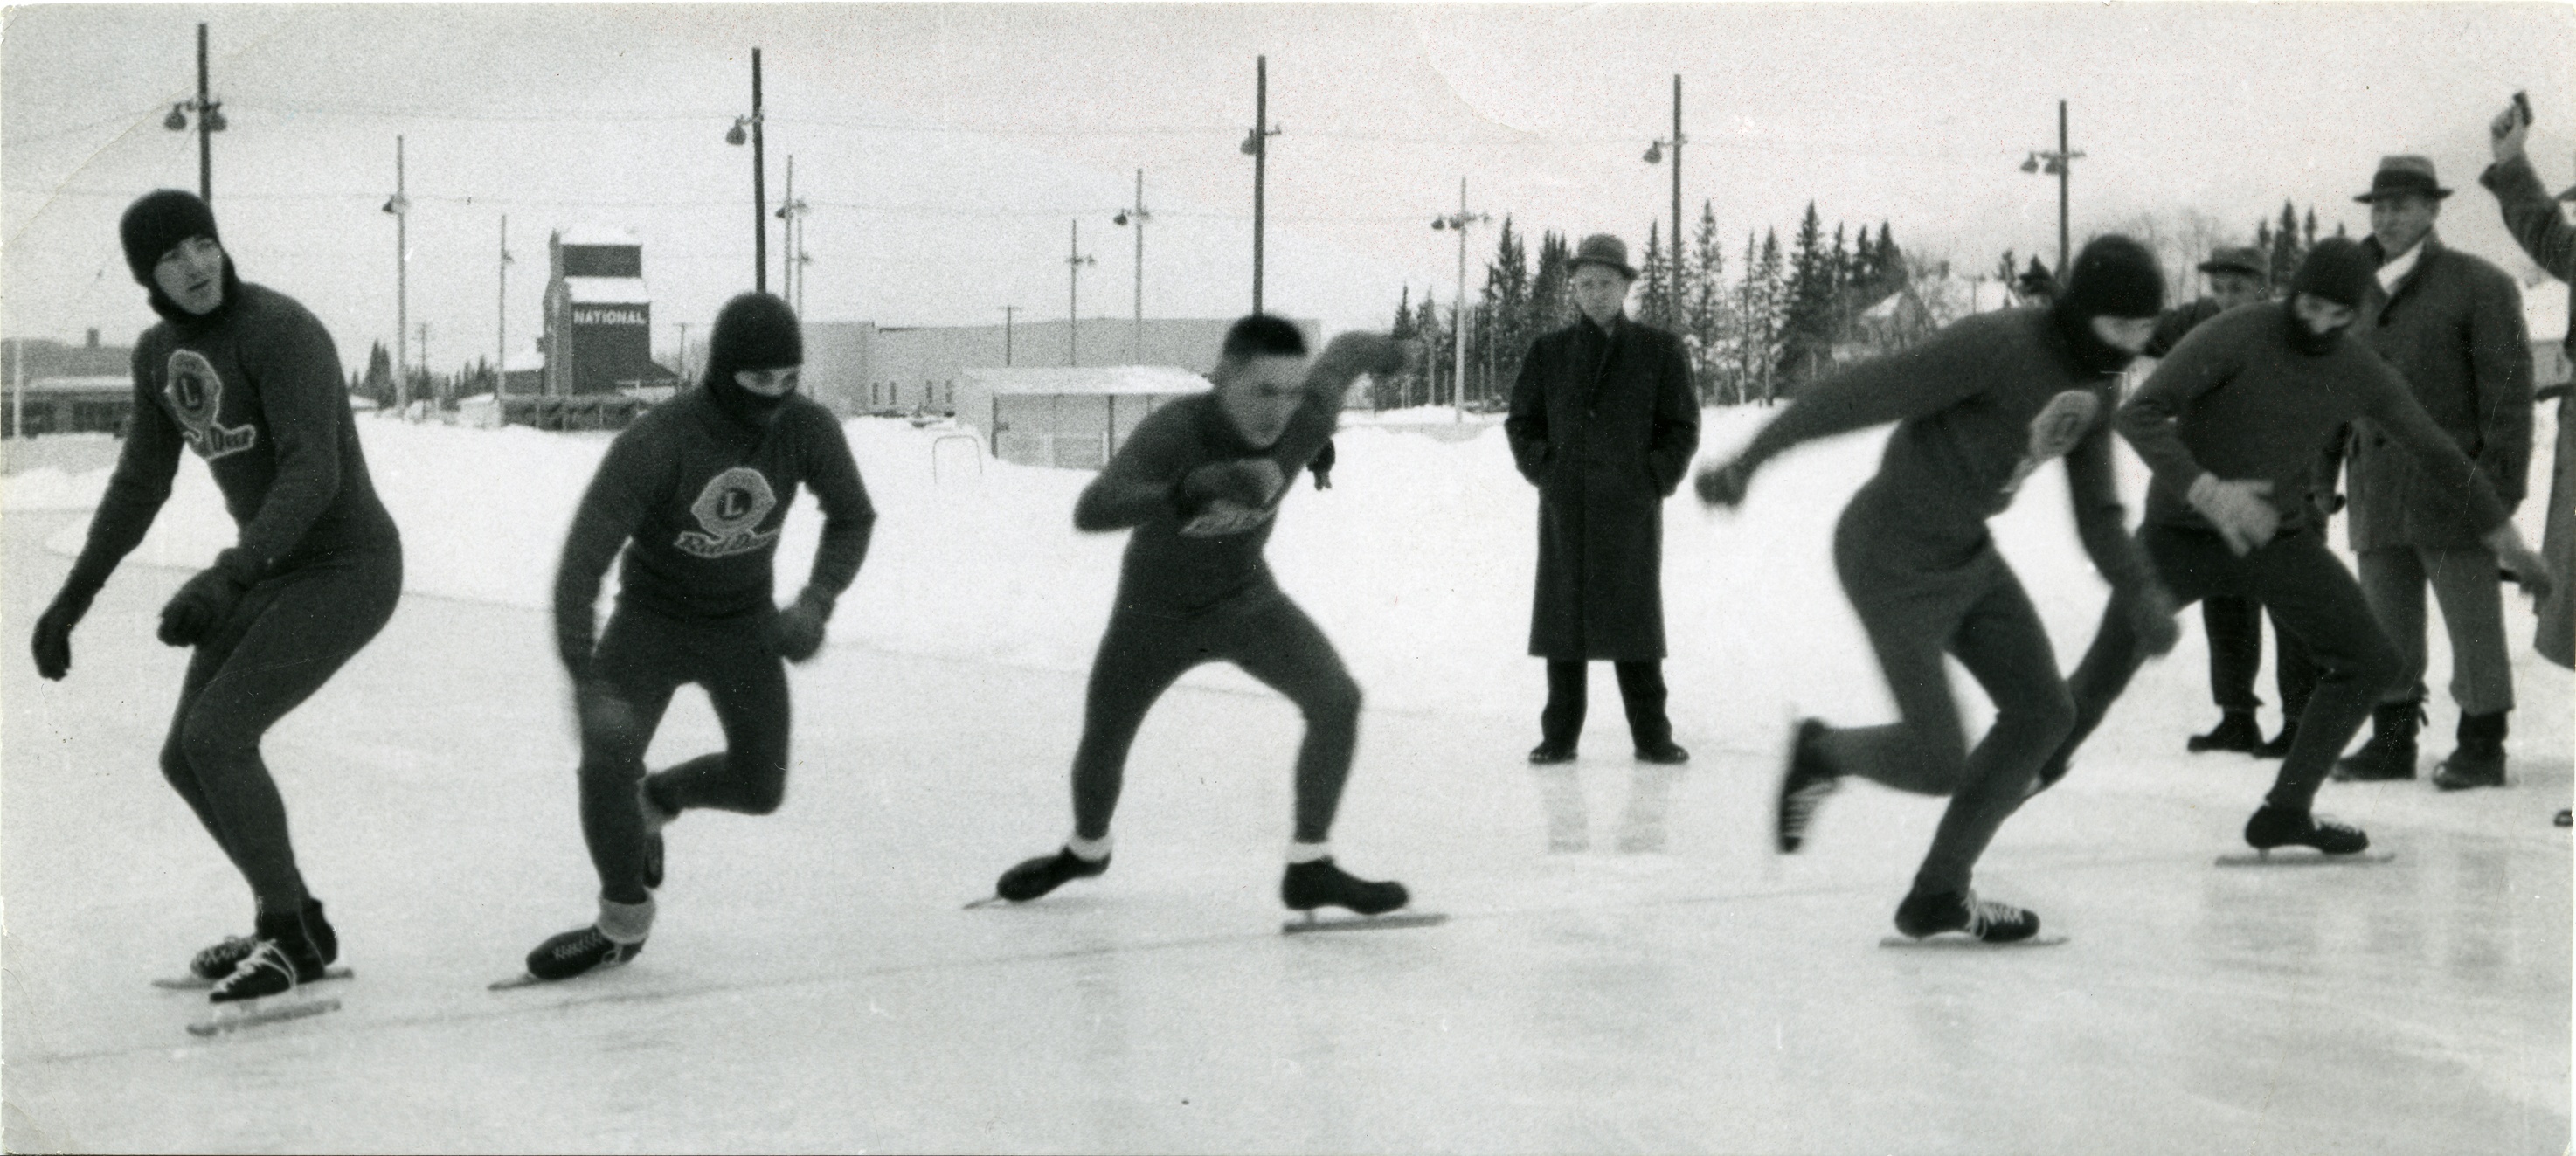 HONING THEIR SKILLS - Members of the Red Deer Central Lions Speed Skating Club compete on the outdoor oval on the east side of 47 A Avenue